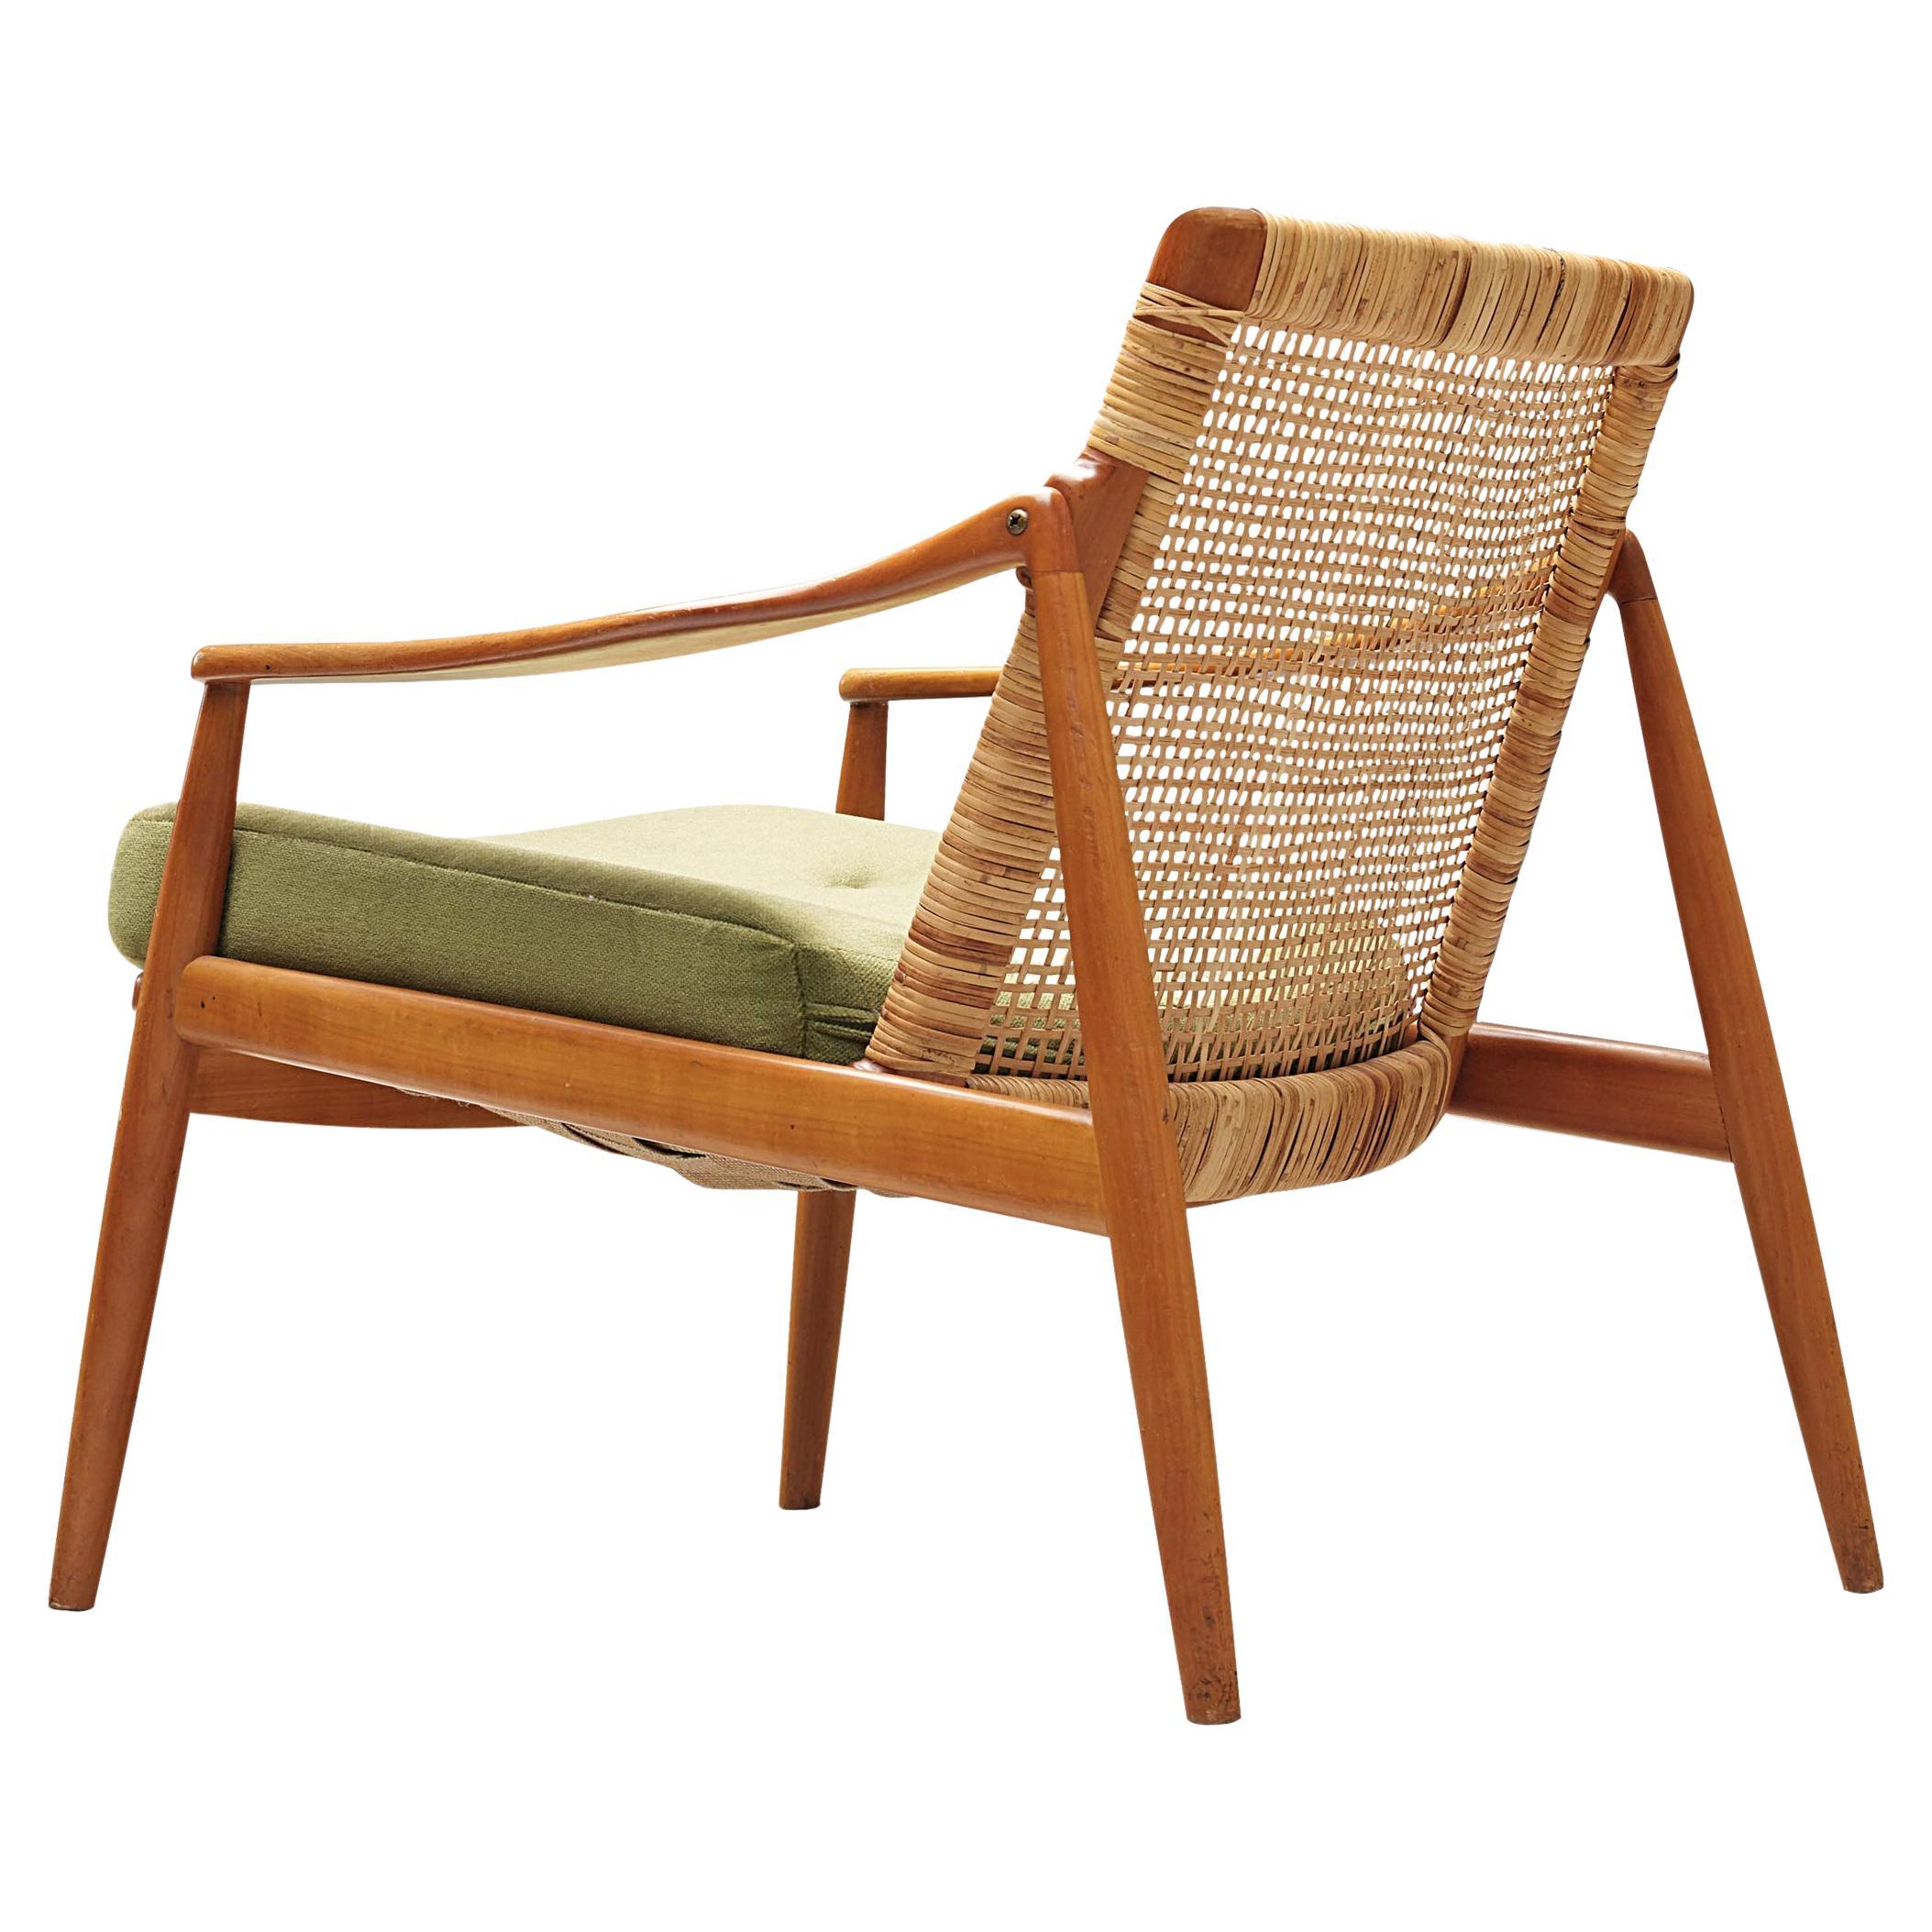 Hartmut Lohmeyer for Wilkhahn Lounge Chair in Teak and Cane